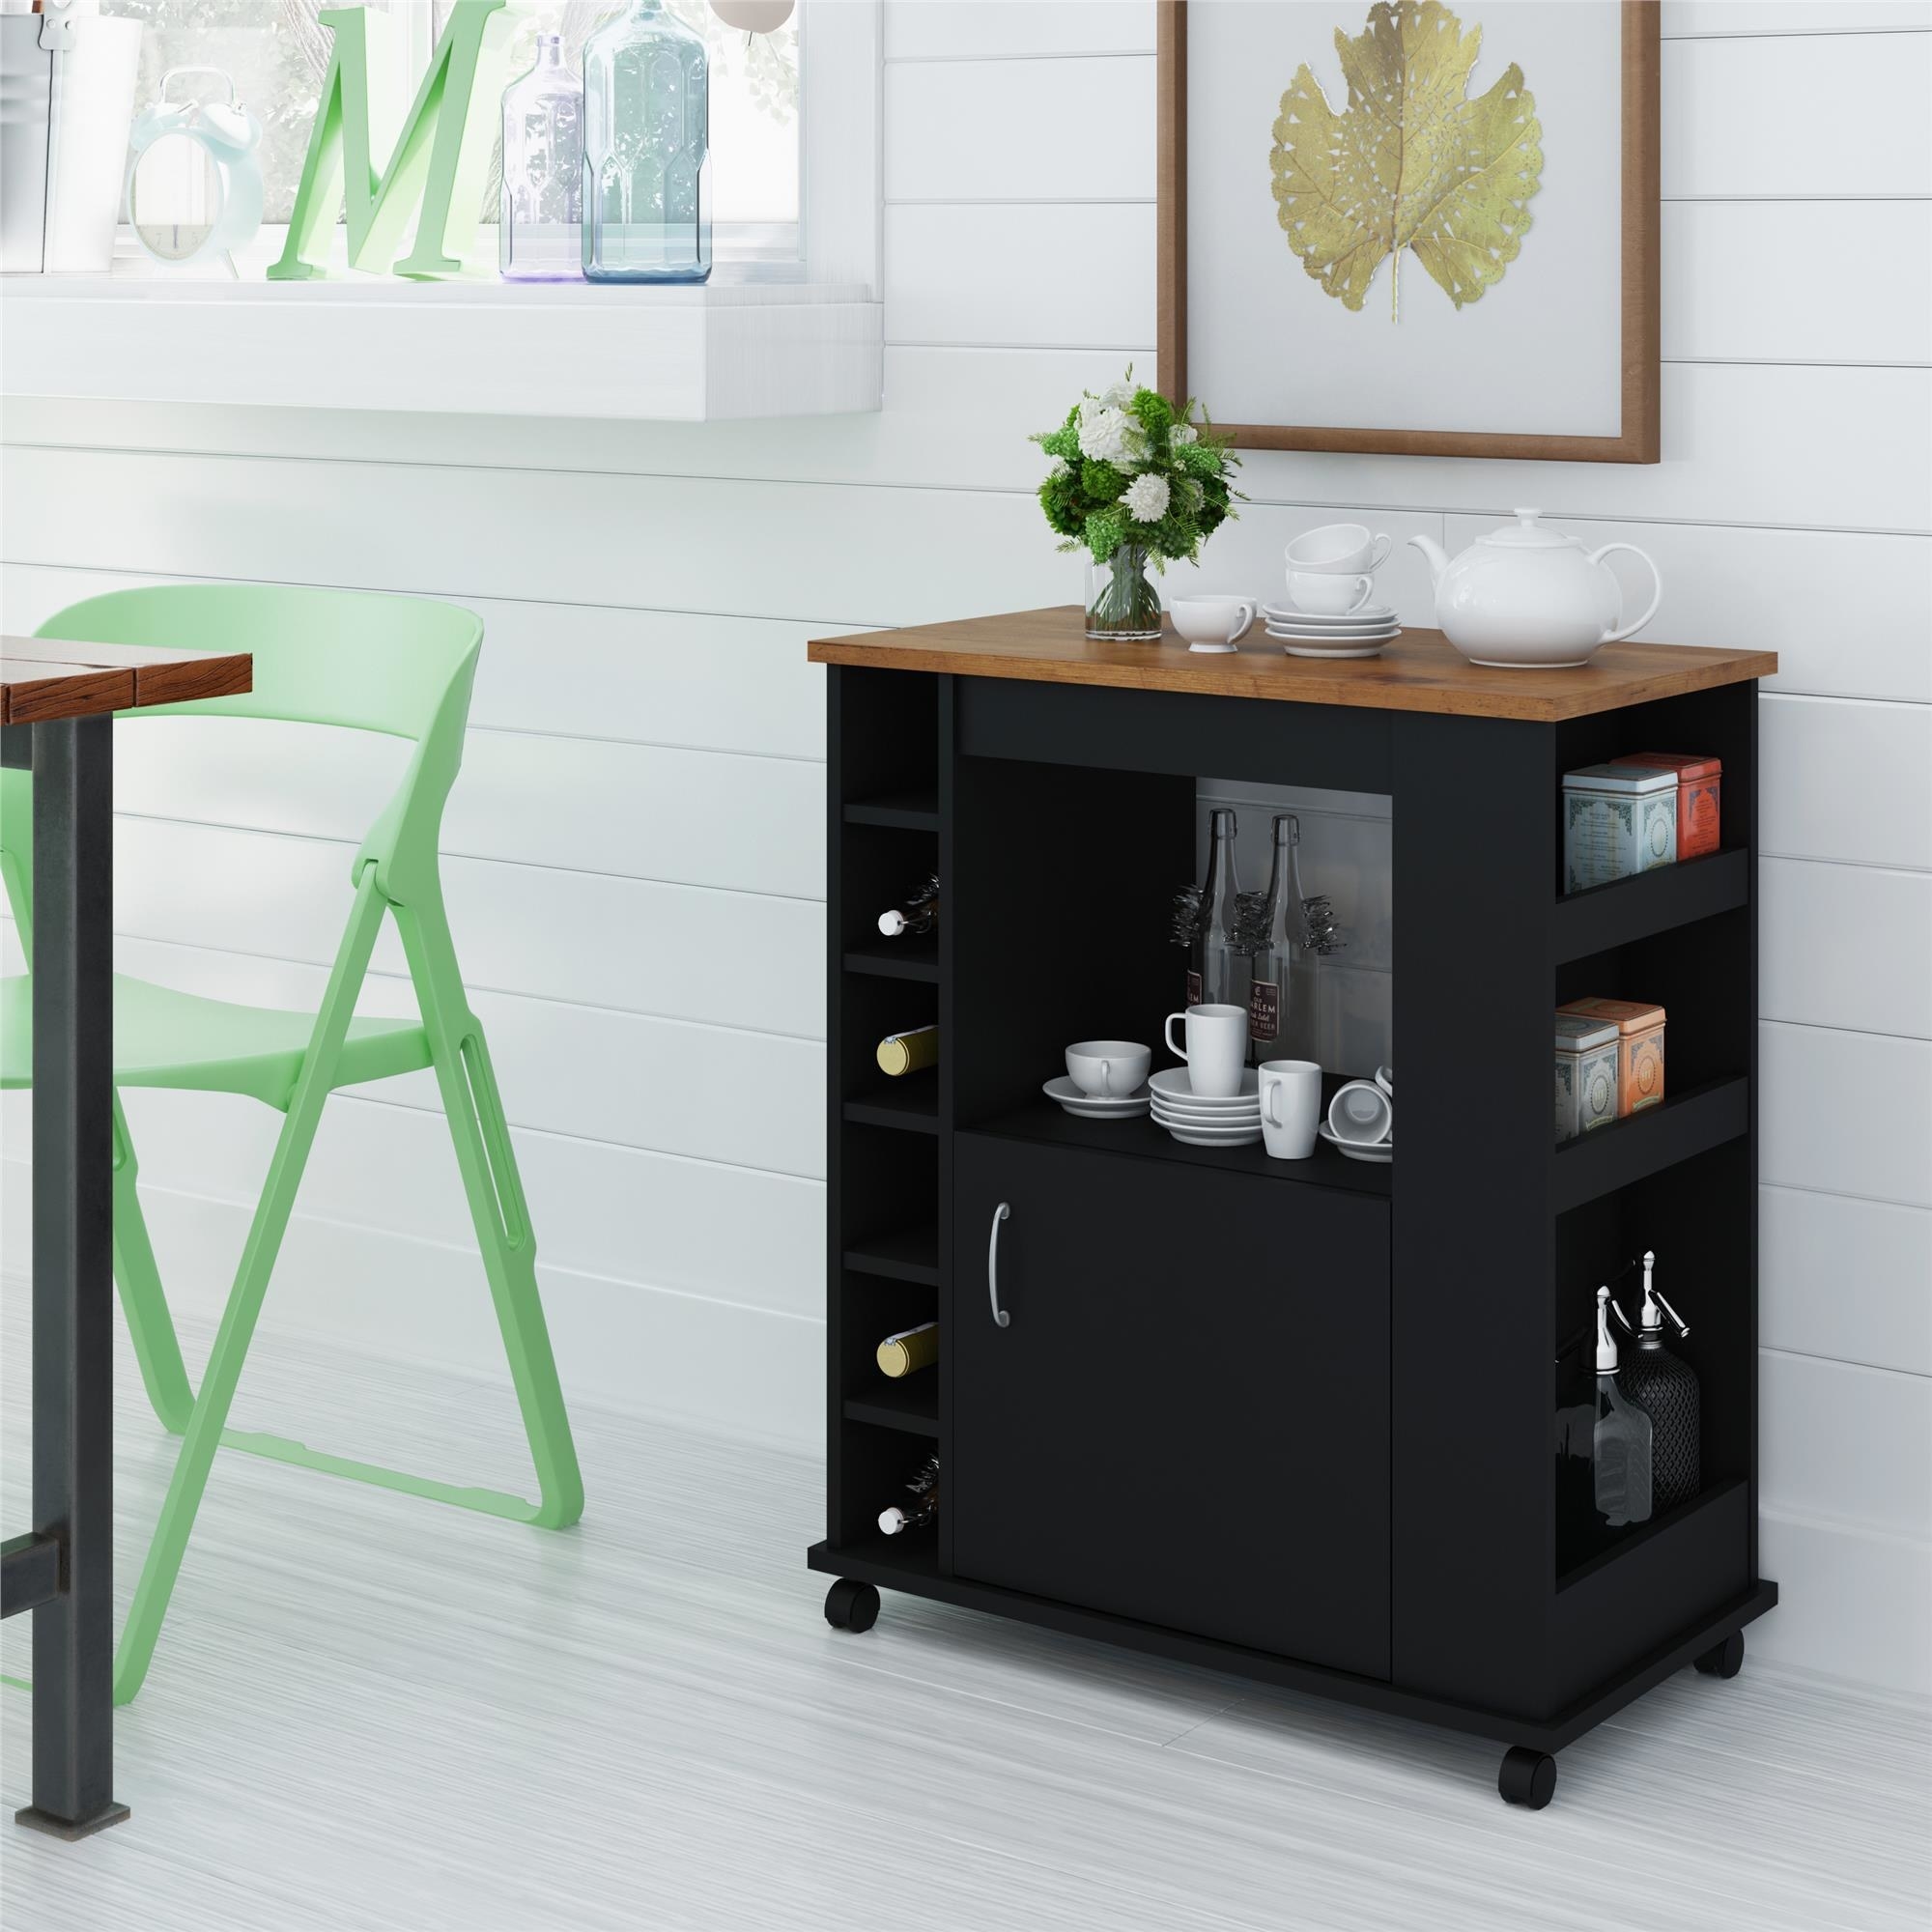 a black kitchen cart on wheels with shelves, wine holders, and a drawer